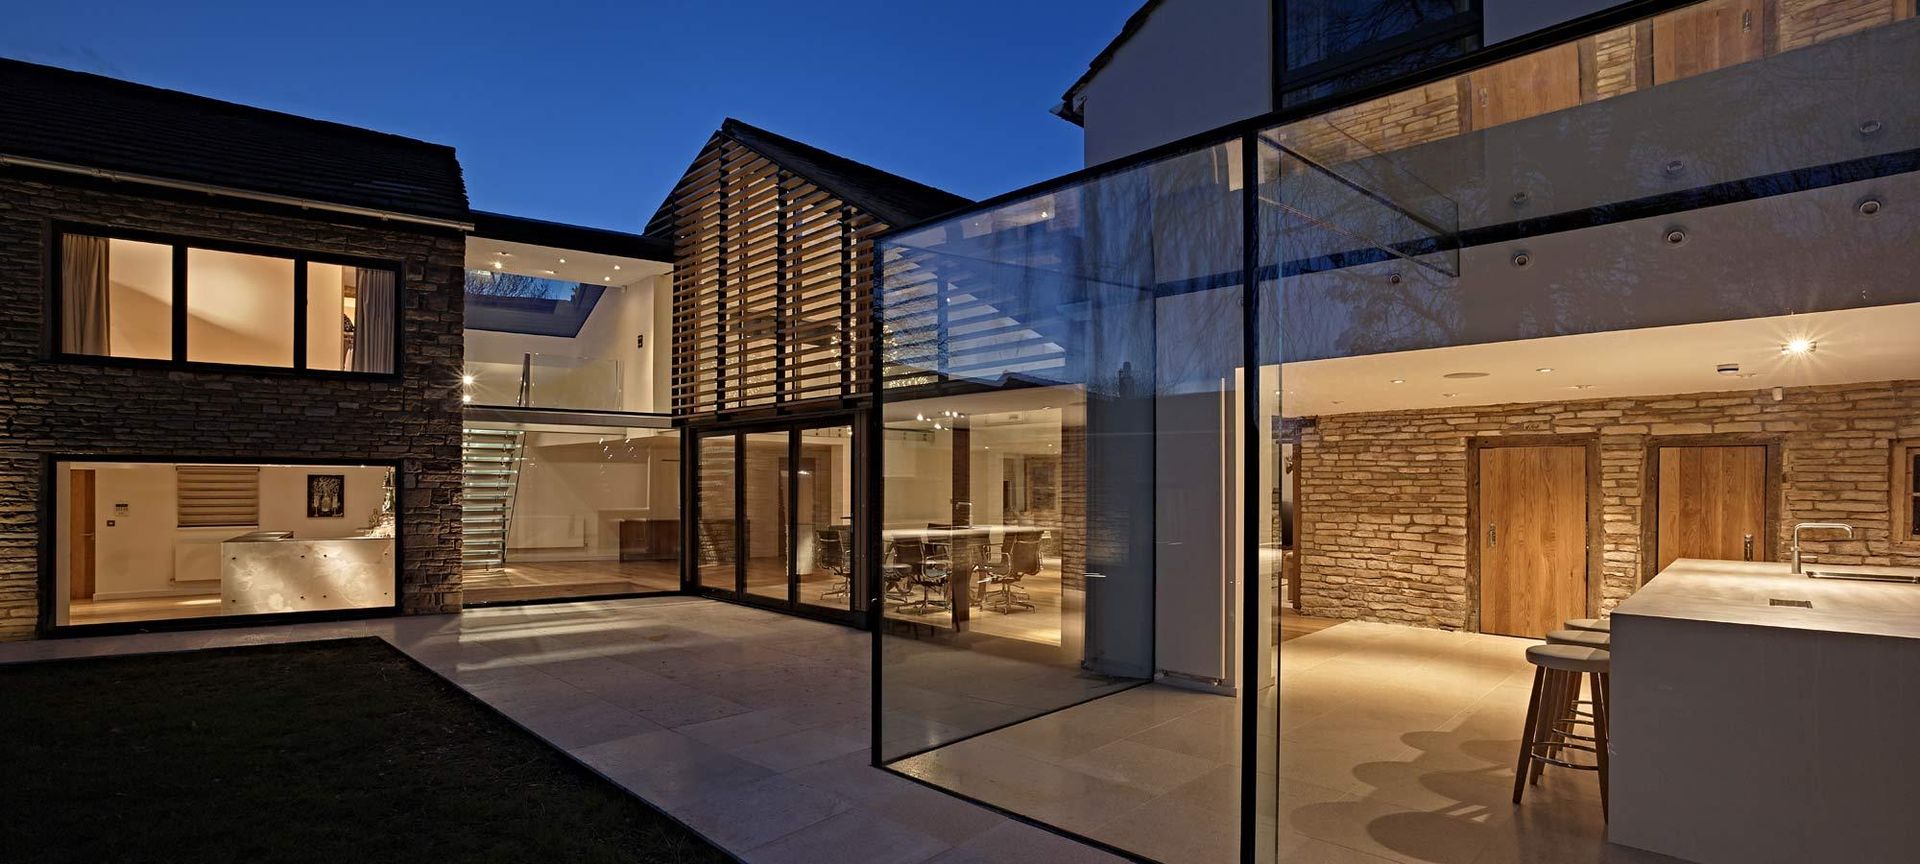 House 141, Andrew Wallace Architects Andrew Wallace Architects Minimalist Evler